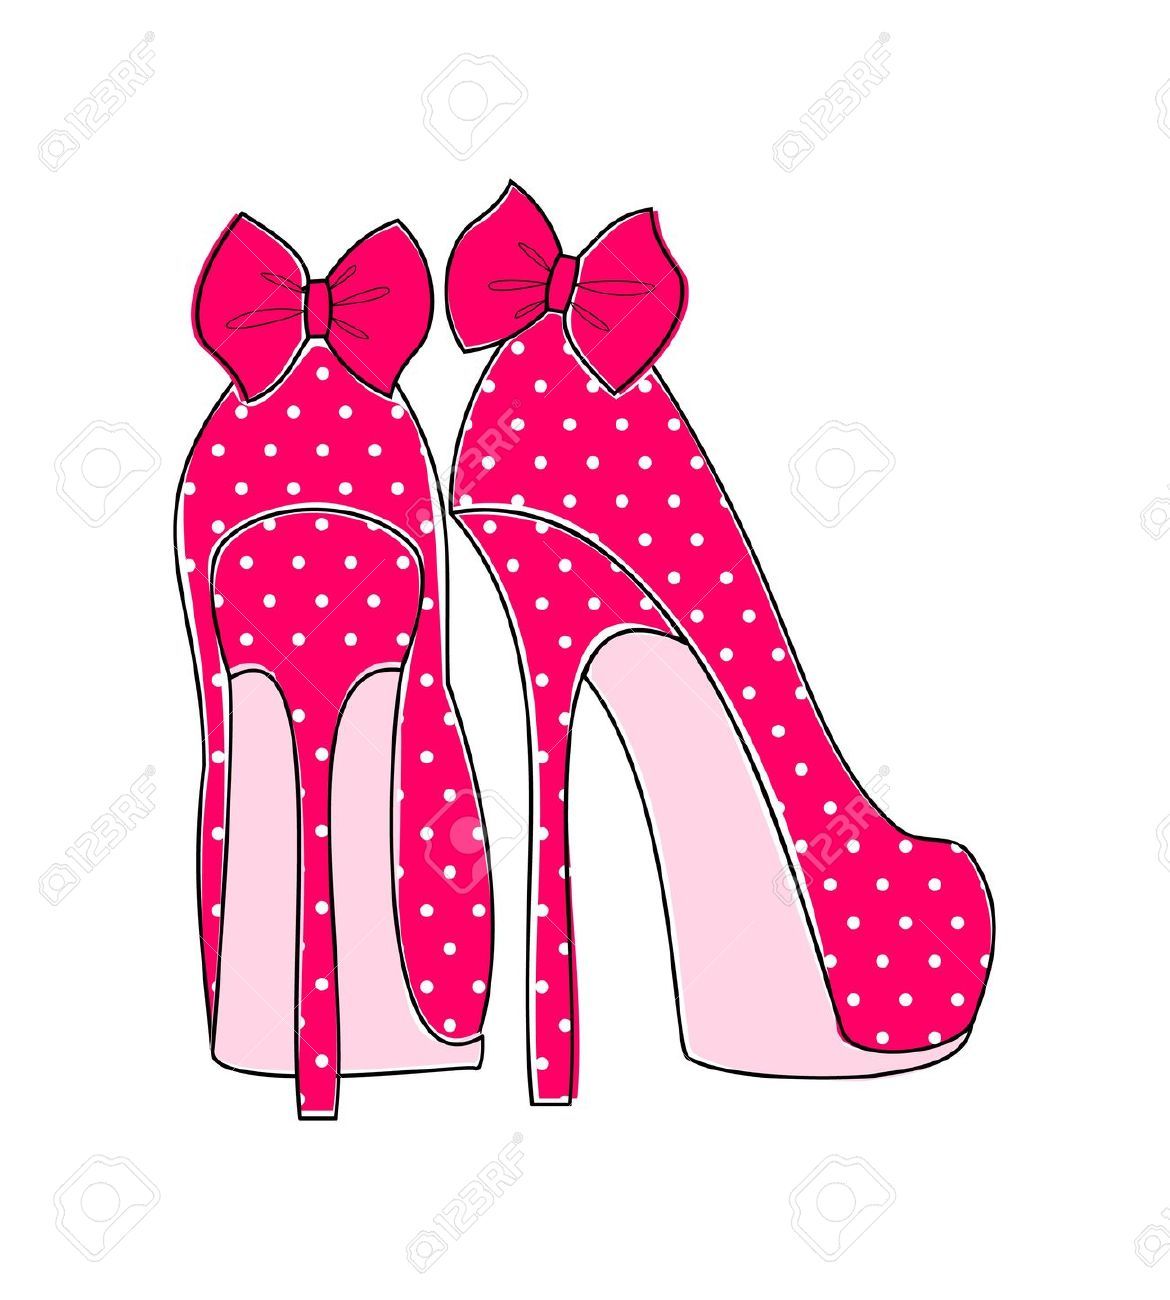 Shoe Cliparts, Stock Vector And Royalty Free Shoe